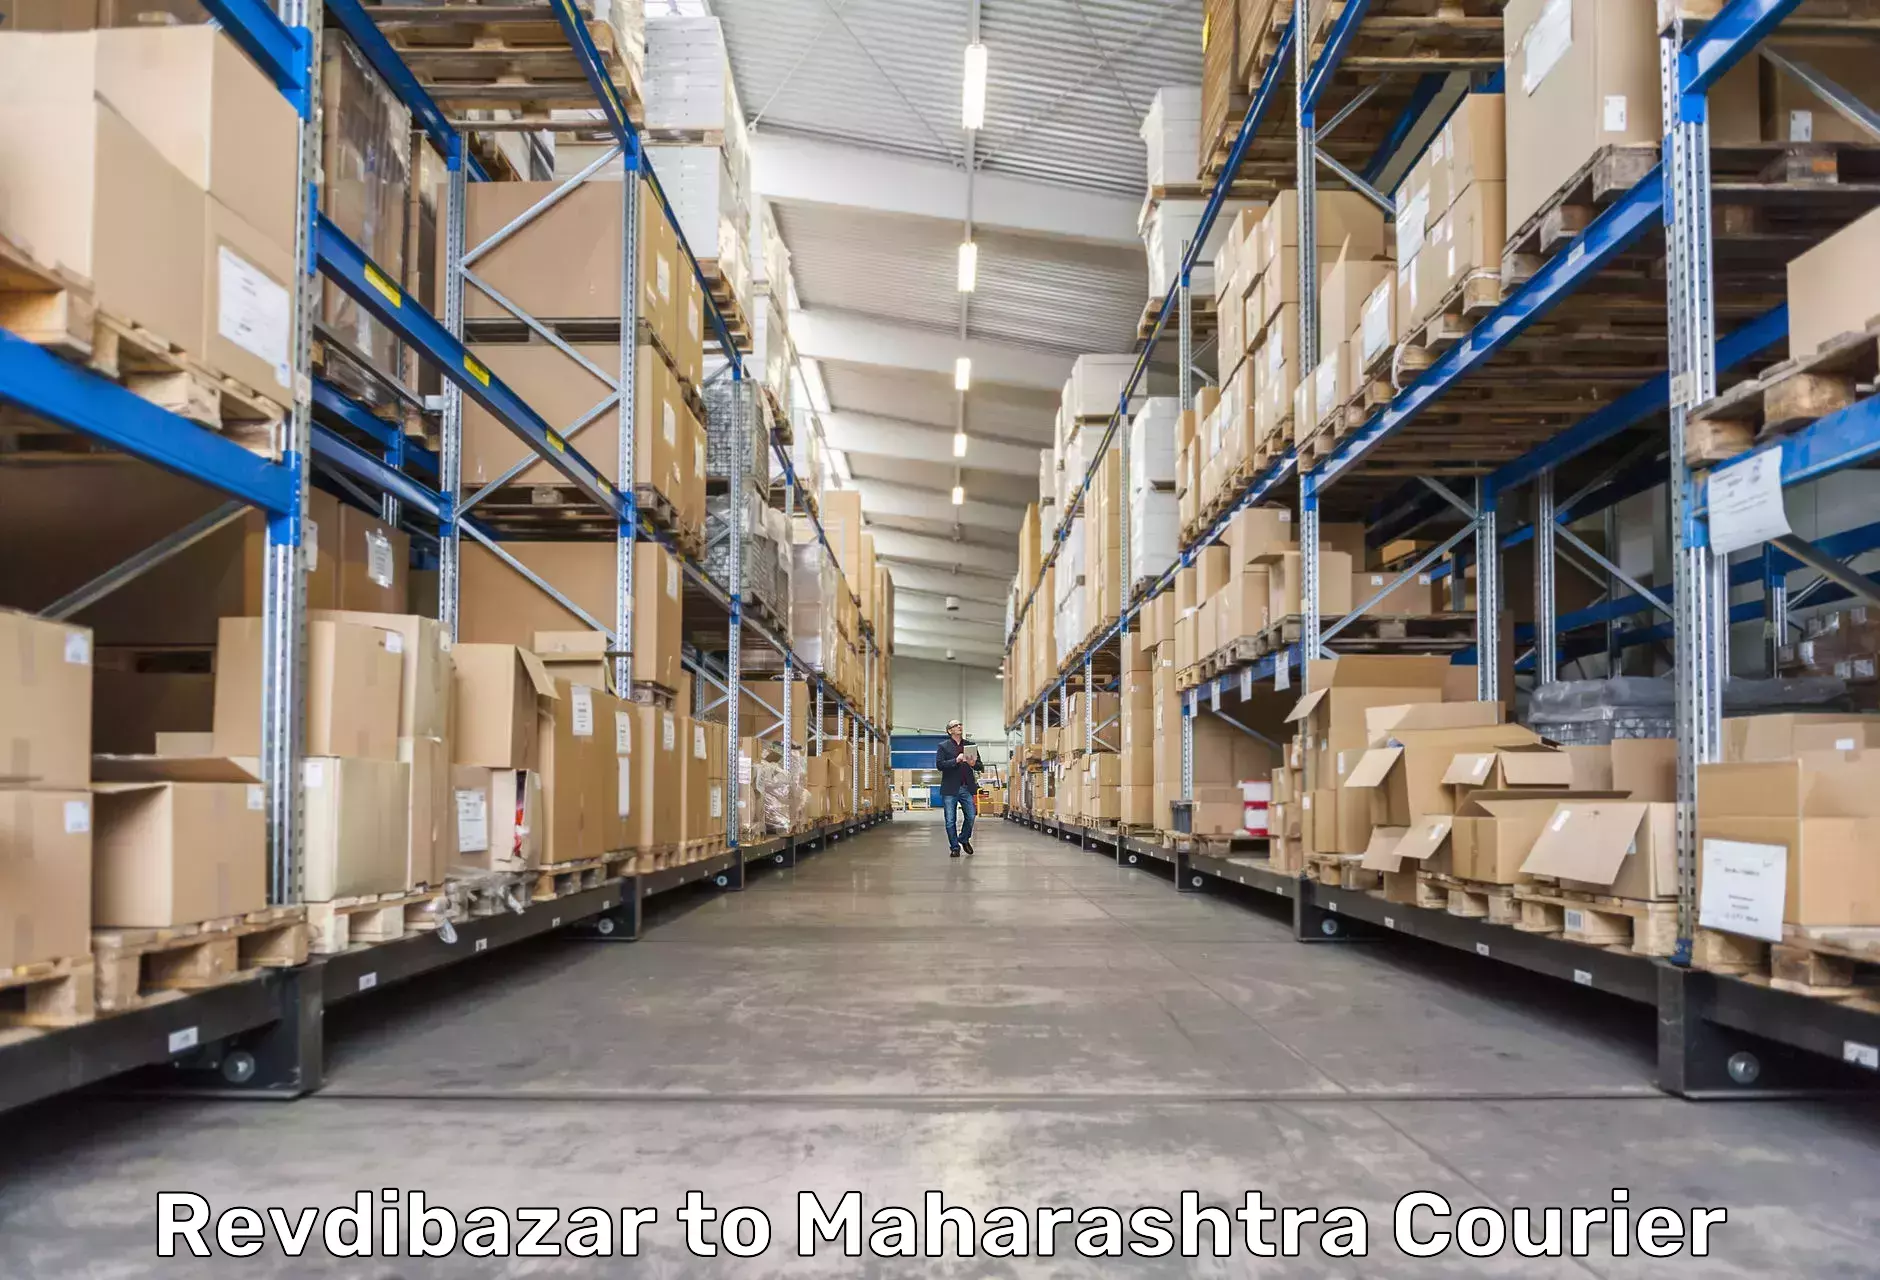 Next-day delivery options in Revdibazar to Saswad